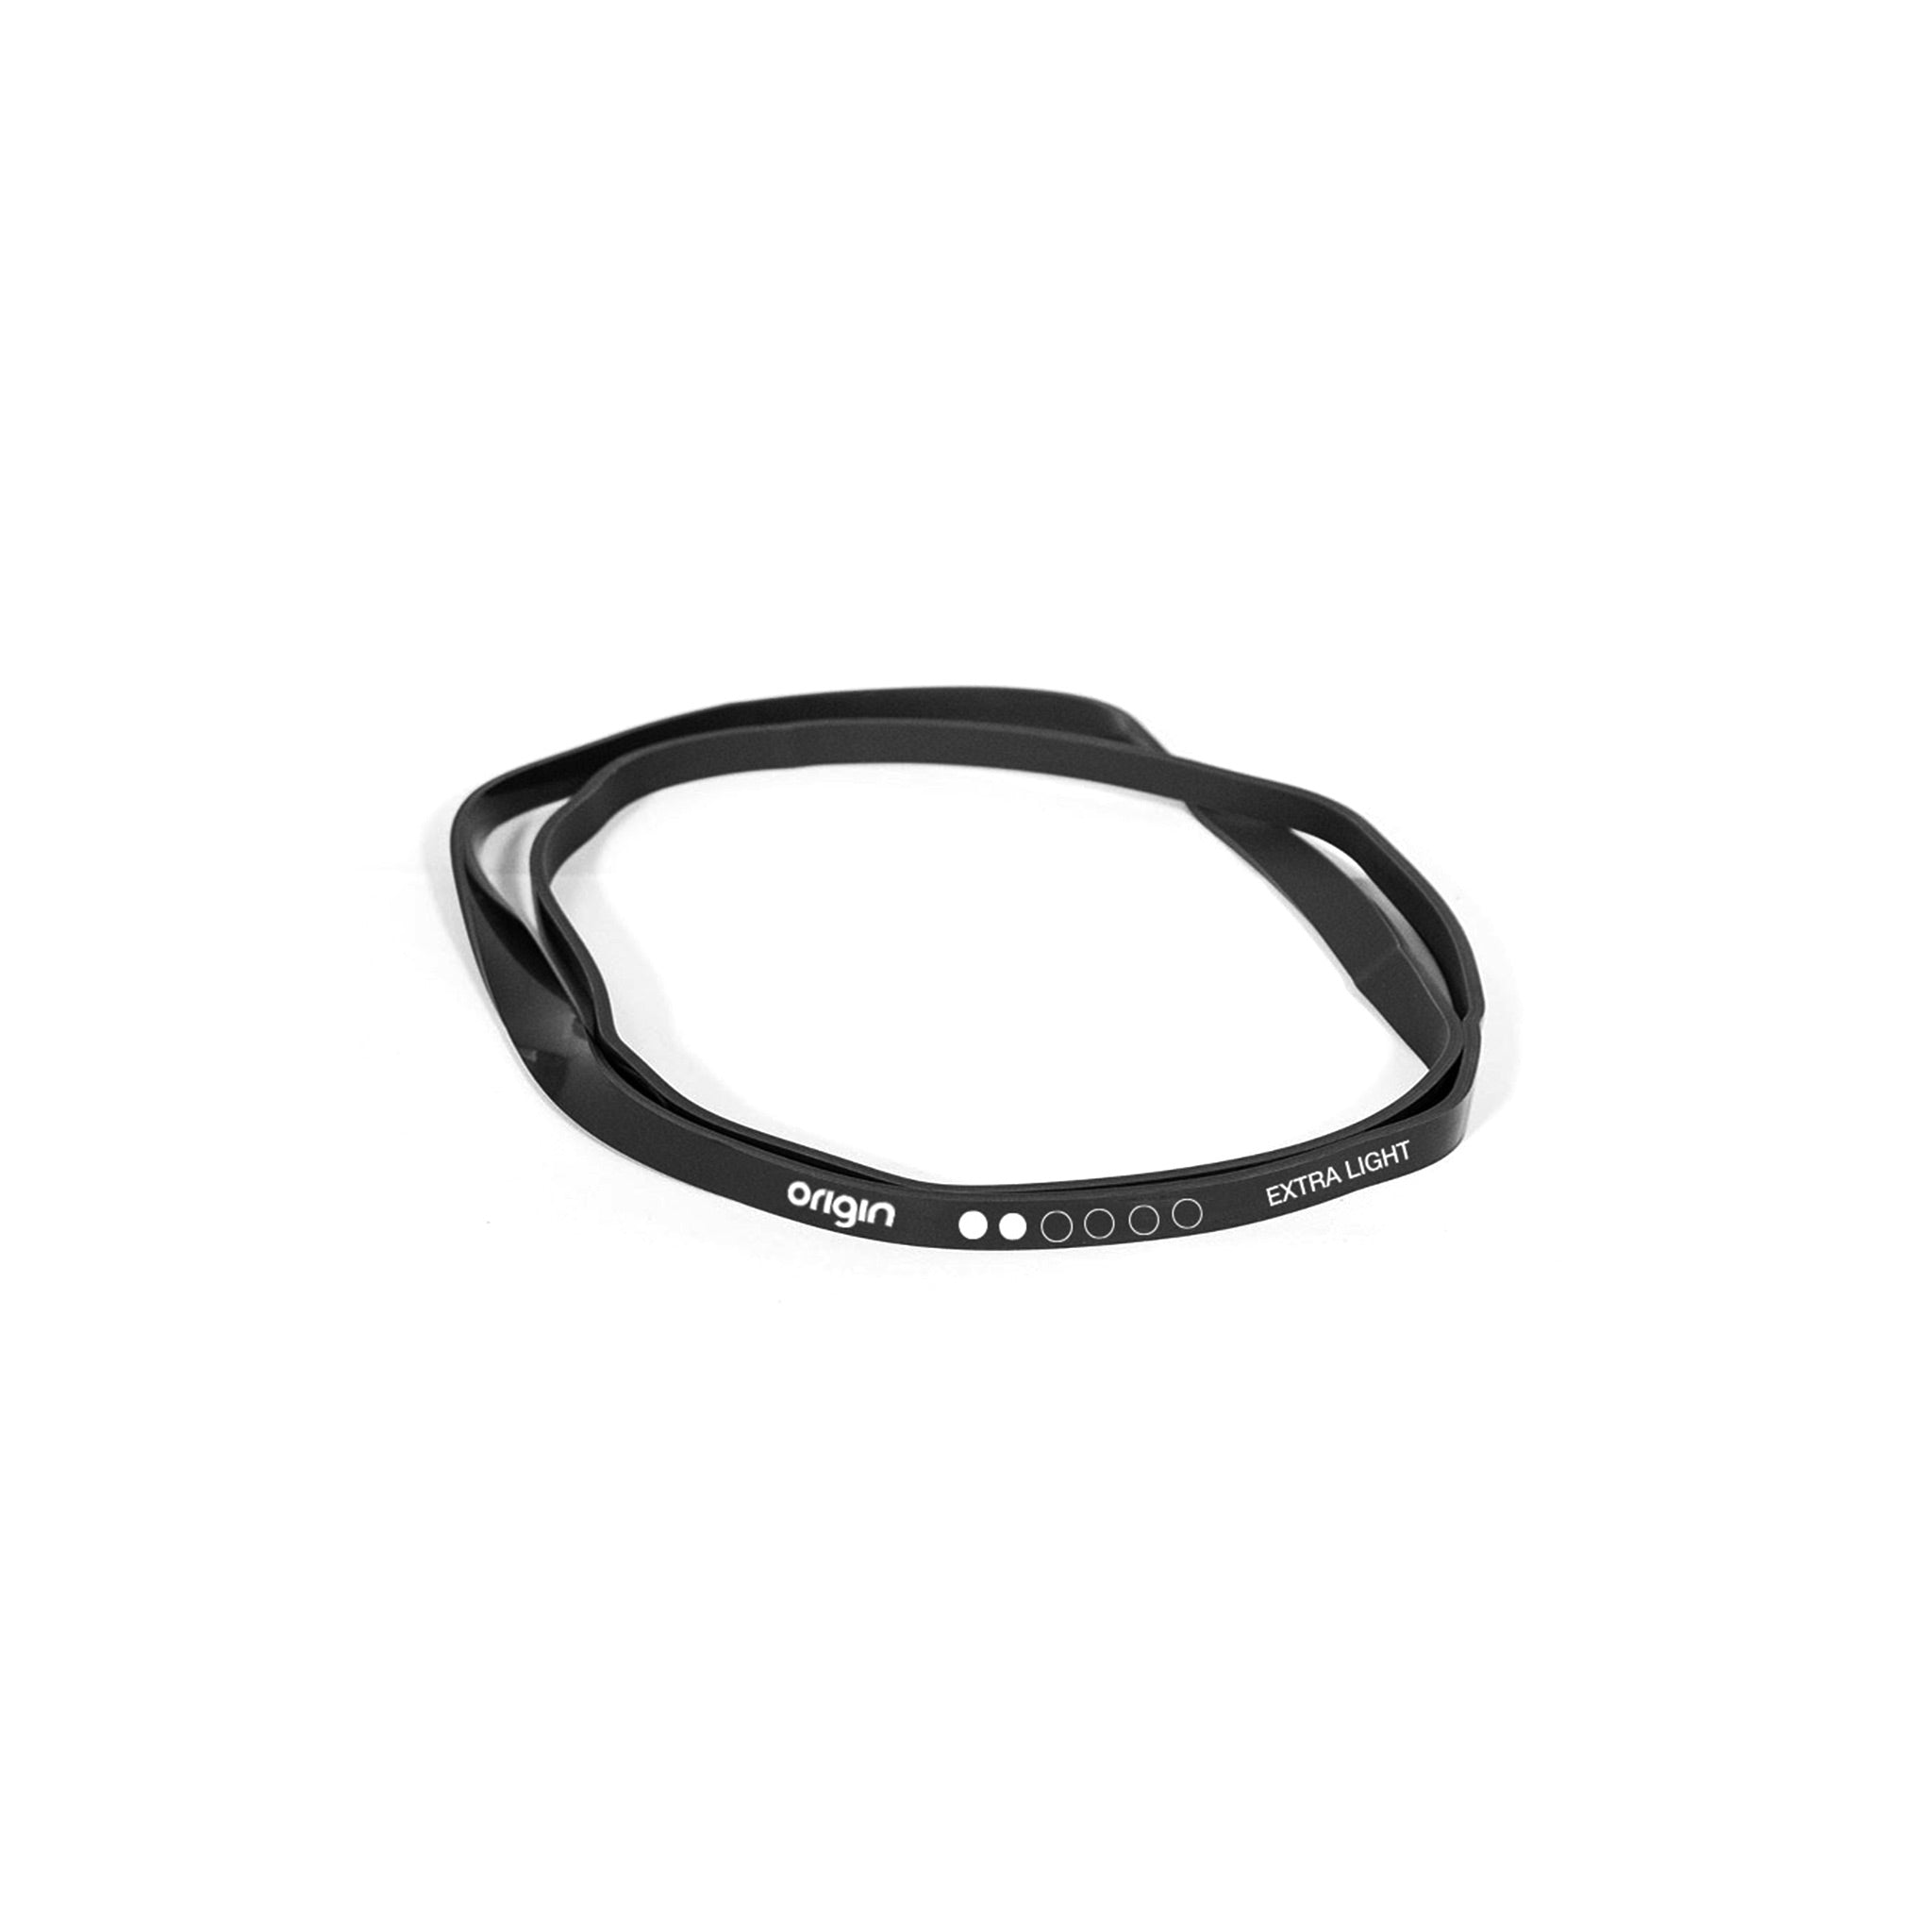 thin black resistance power band extra light